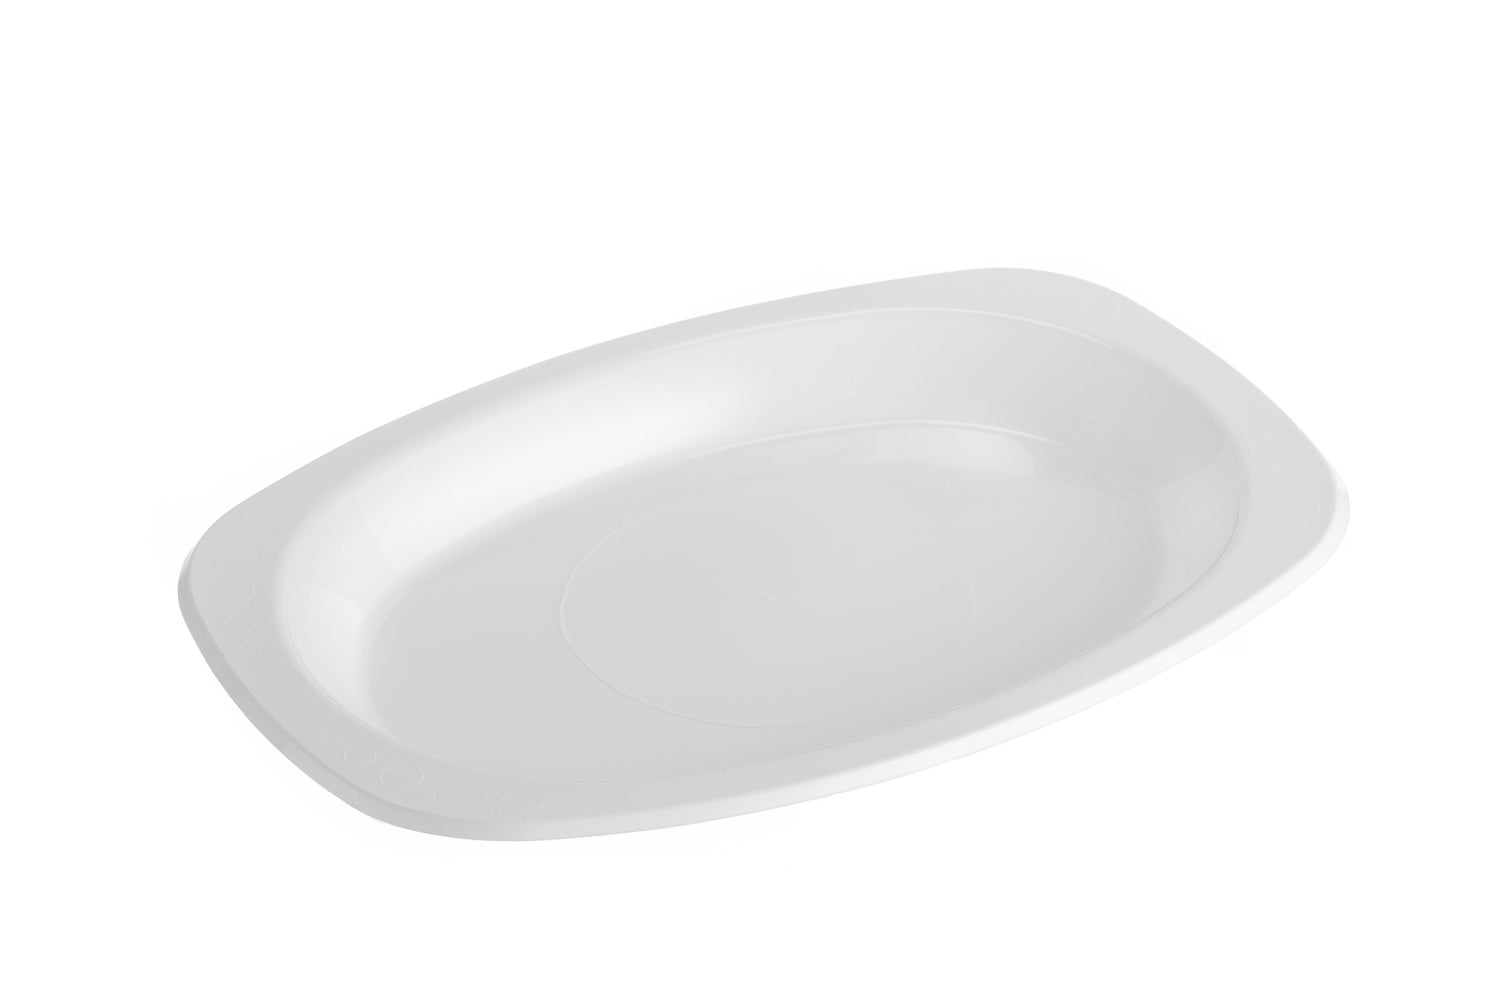 Reusable Oval Plate 210 x 300 - White